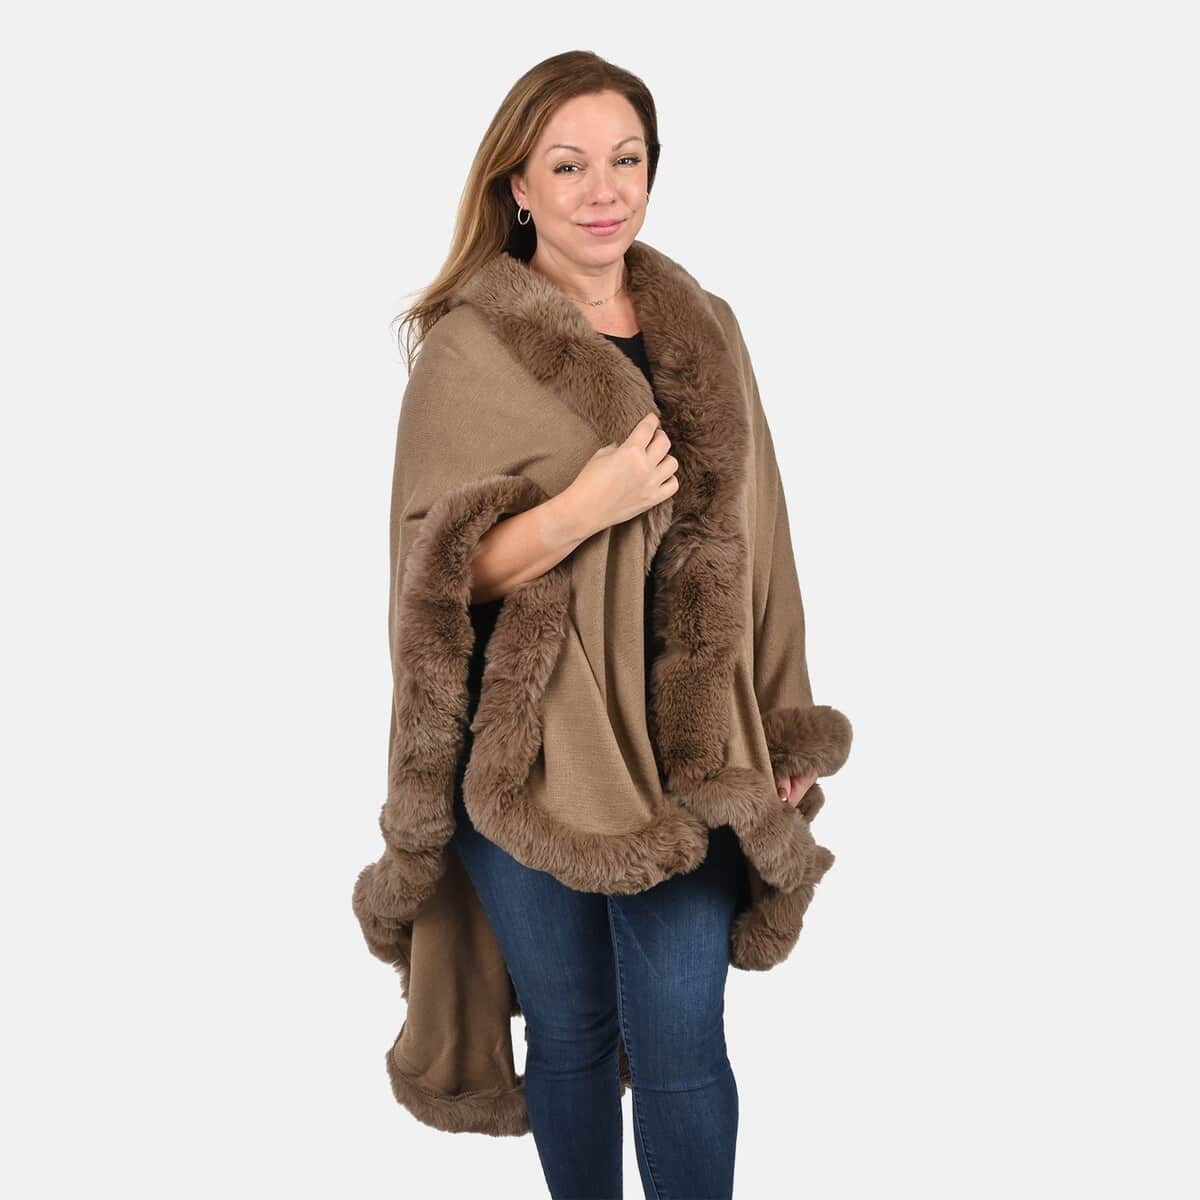 Designer Inspired Beige Ruana with Faux Fur Trim - One Size Fits Most image number 3